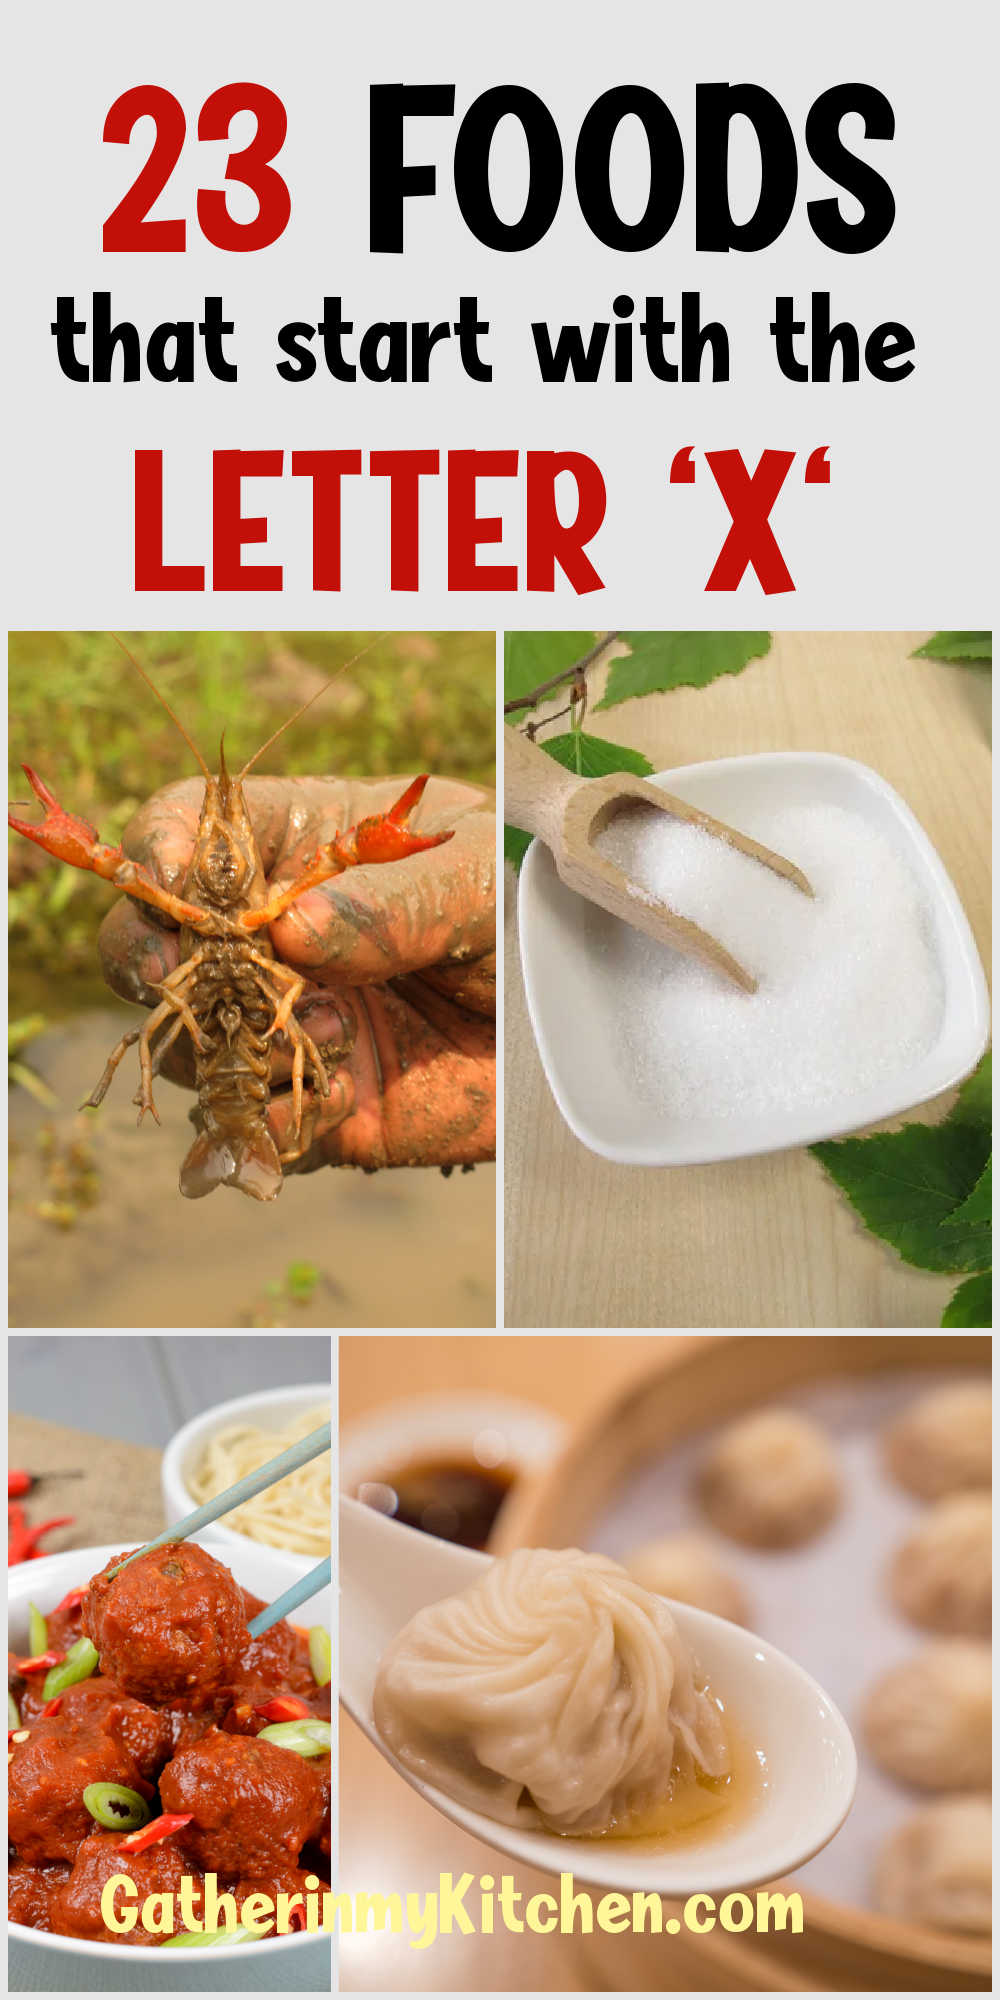 Pin image: top says "23 Foods that start with the letter "x". Bottom has a collage of 4 foods.